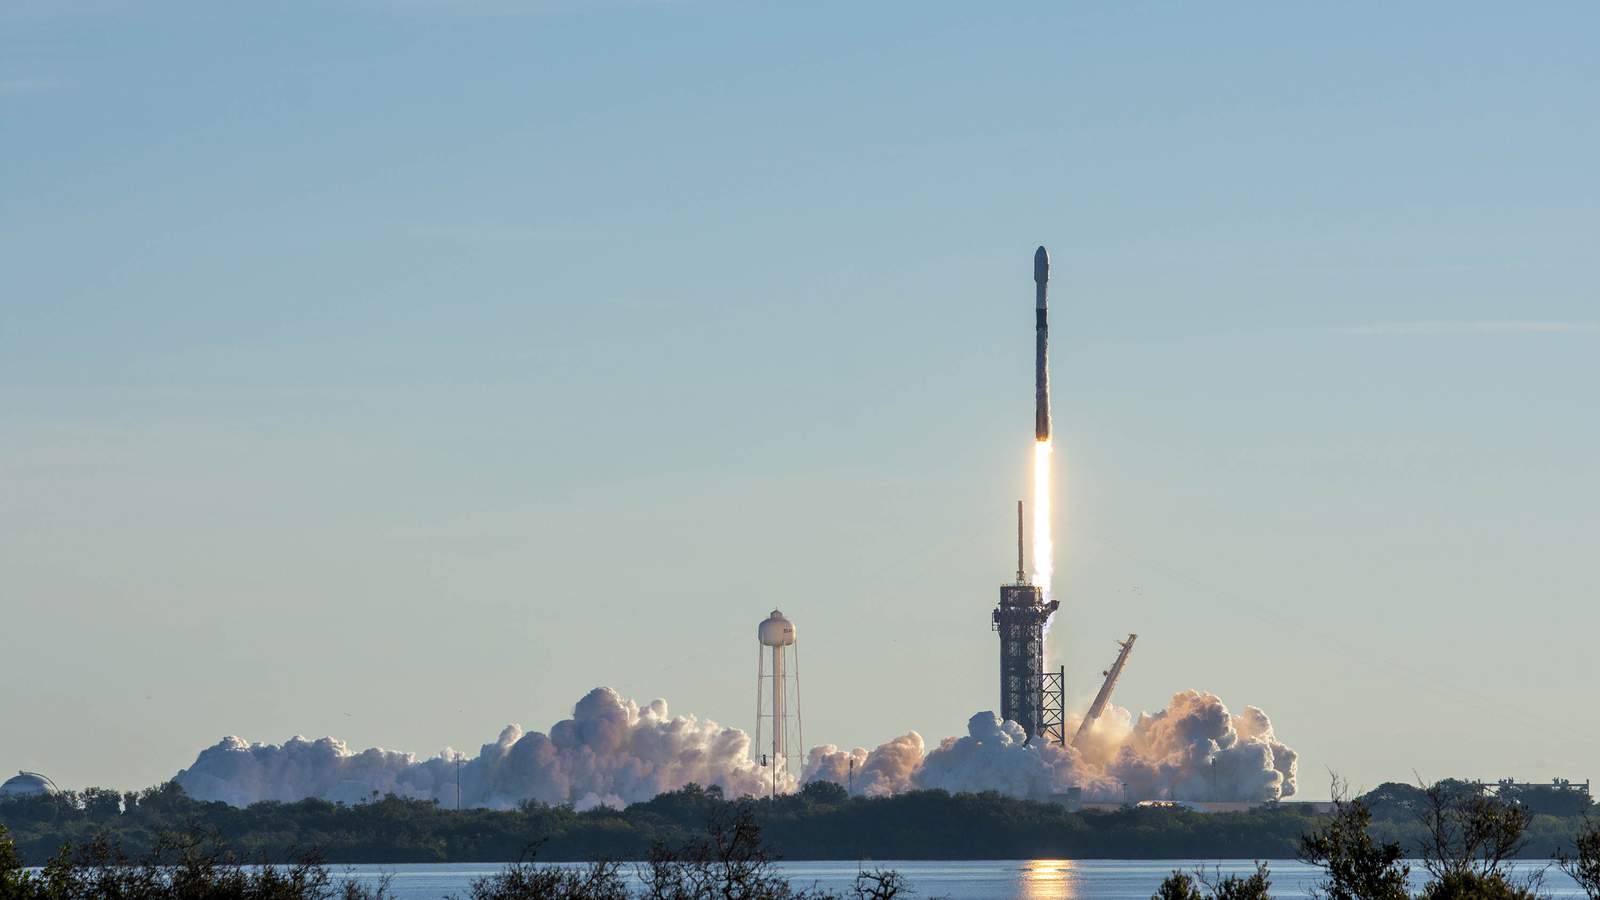 WATCH: SpaceX Falcon 9 rocket to launch satellites in rideshare flight